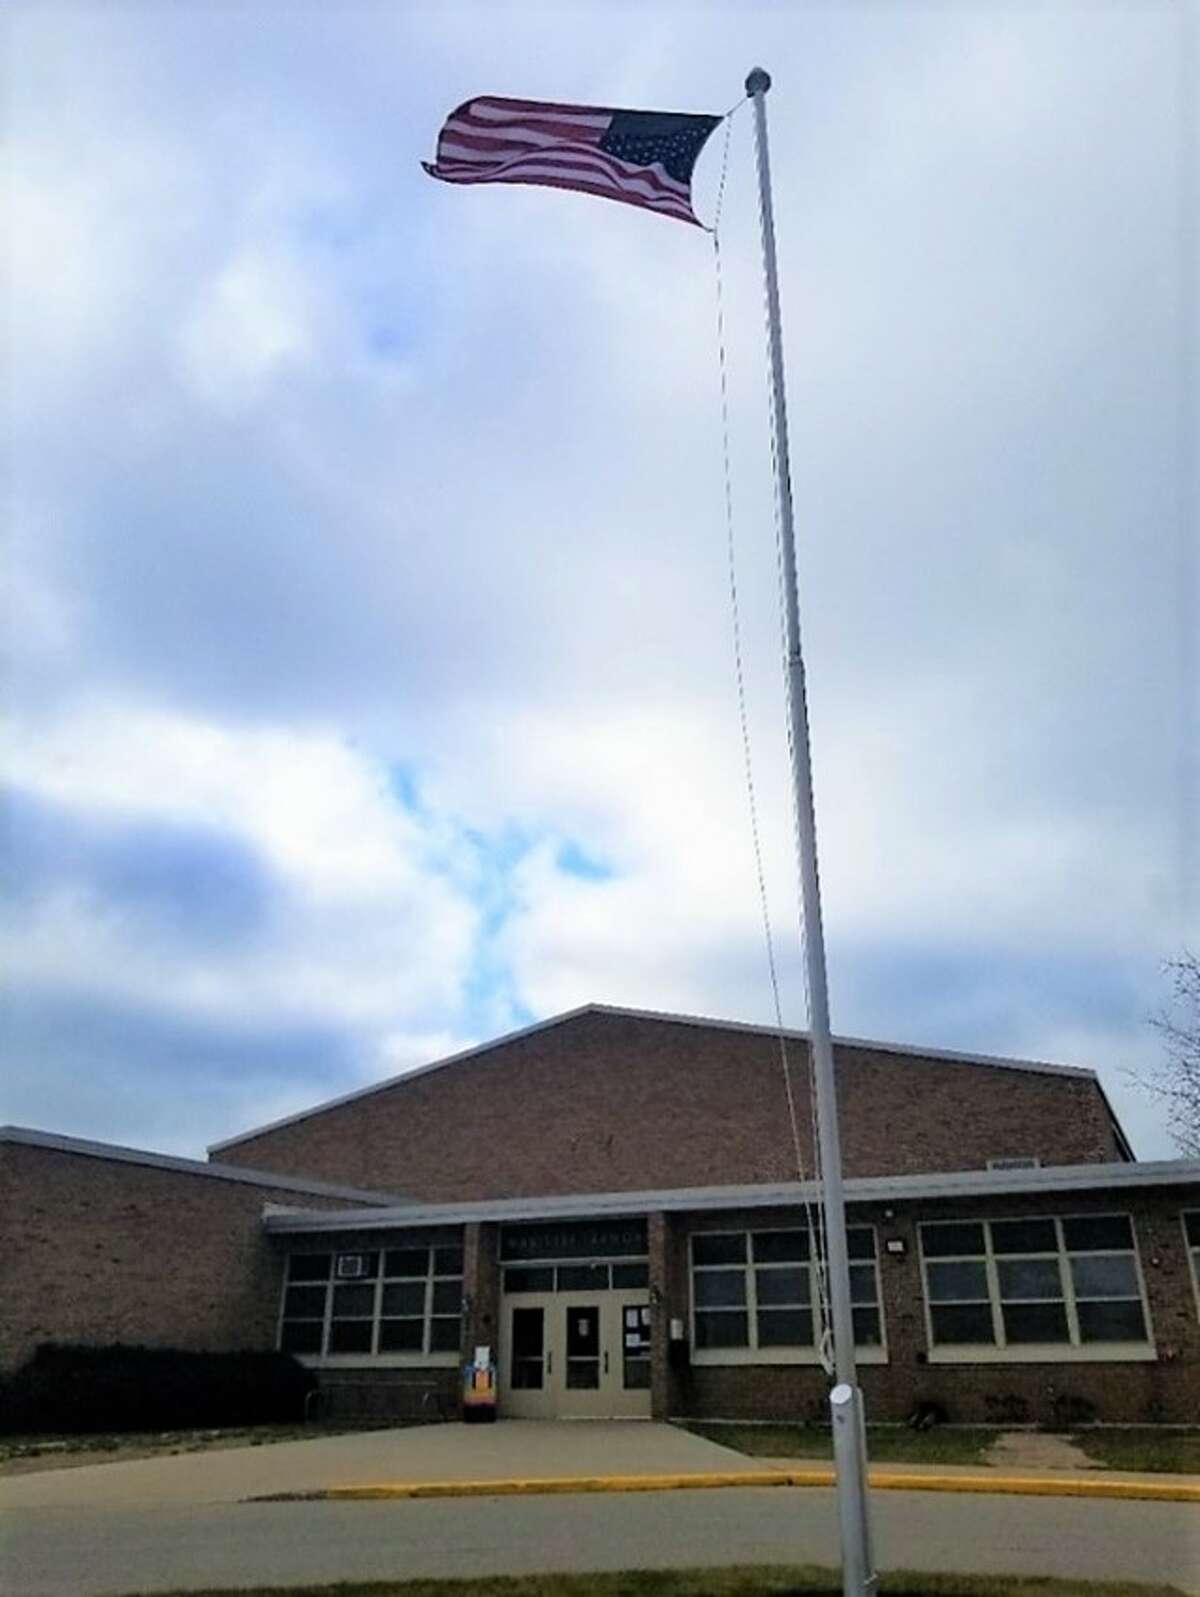 The Armory Youth Project recently received a donation of a flagpole and three flags to be displayed at the youth center.